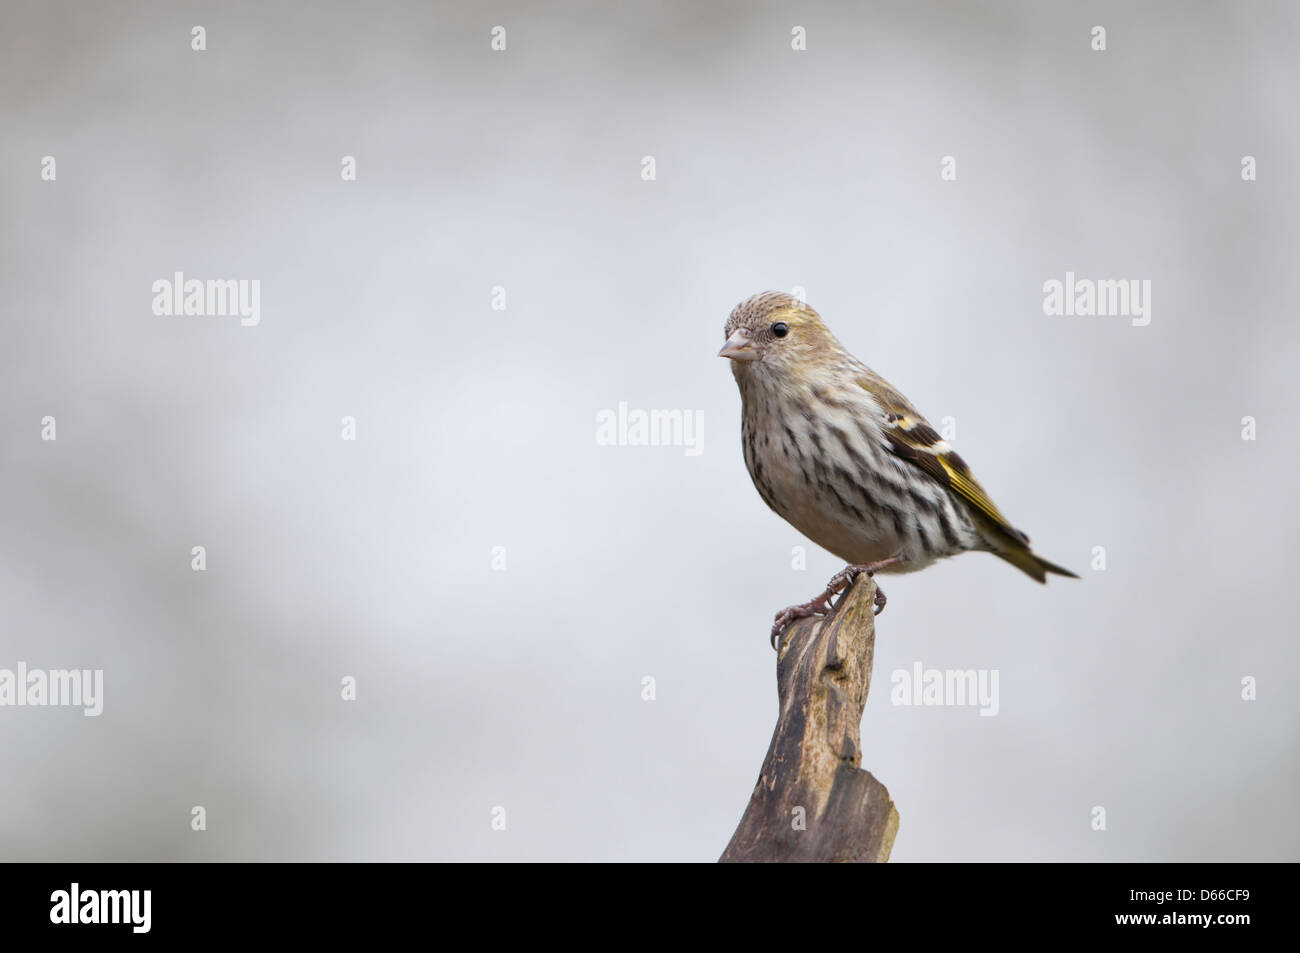 A female siskin perched on tip of branch against an uncluttered background Stock Photo